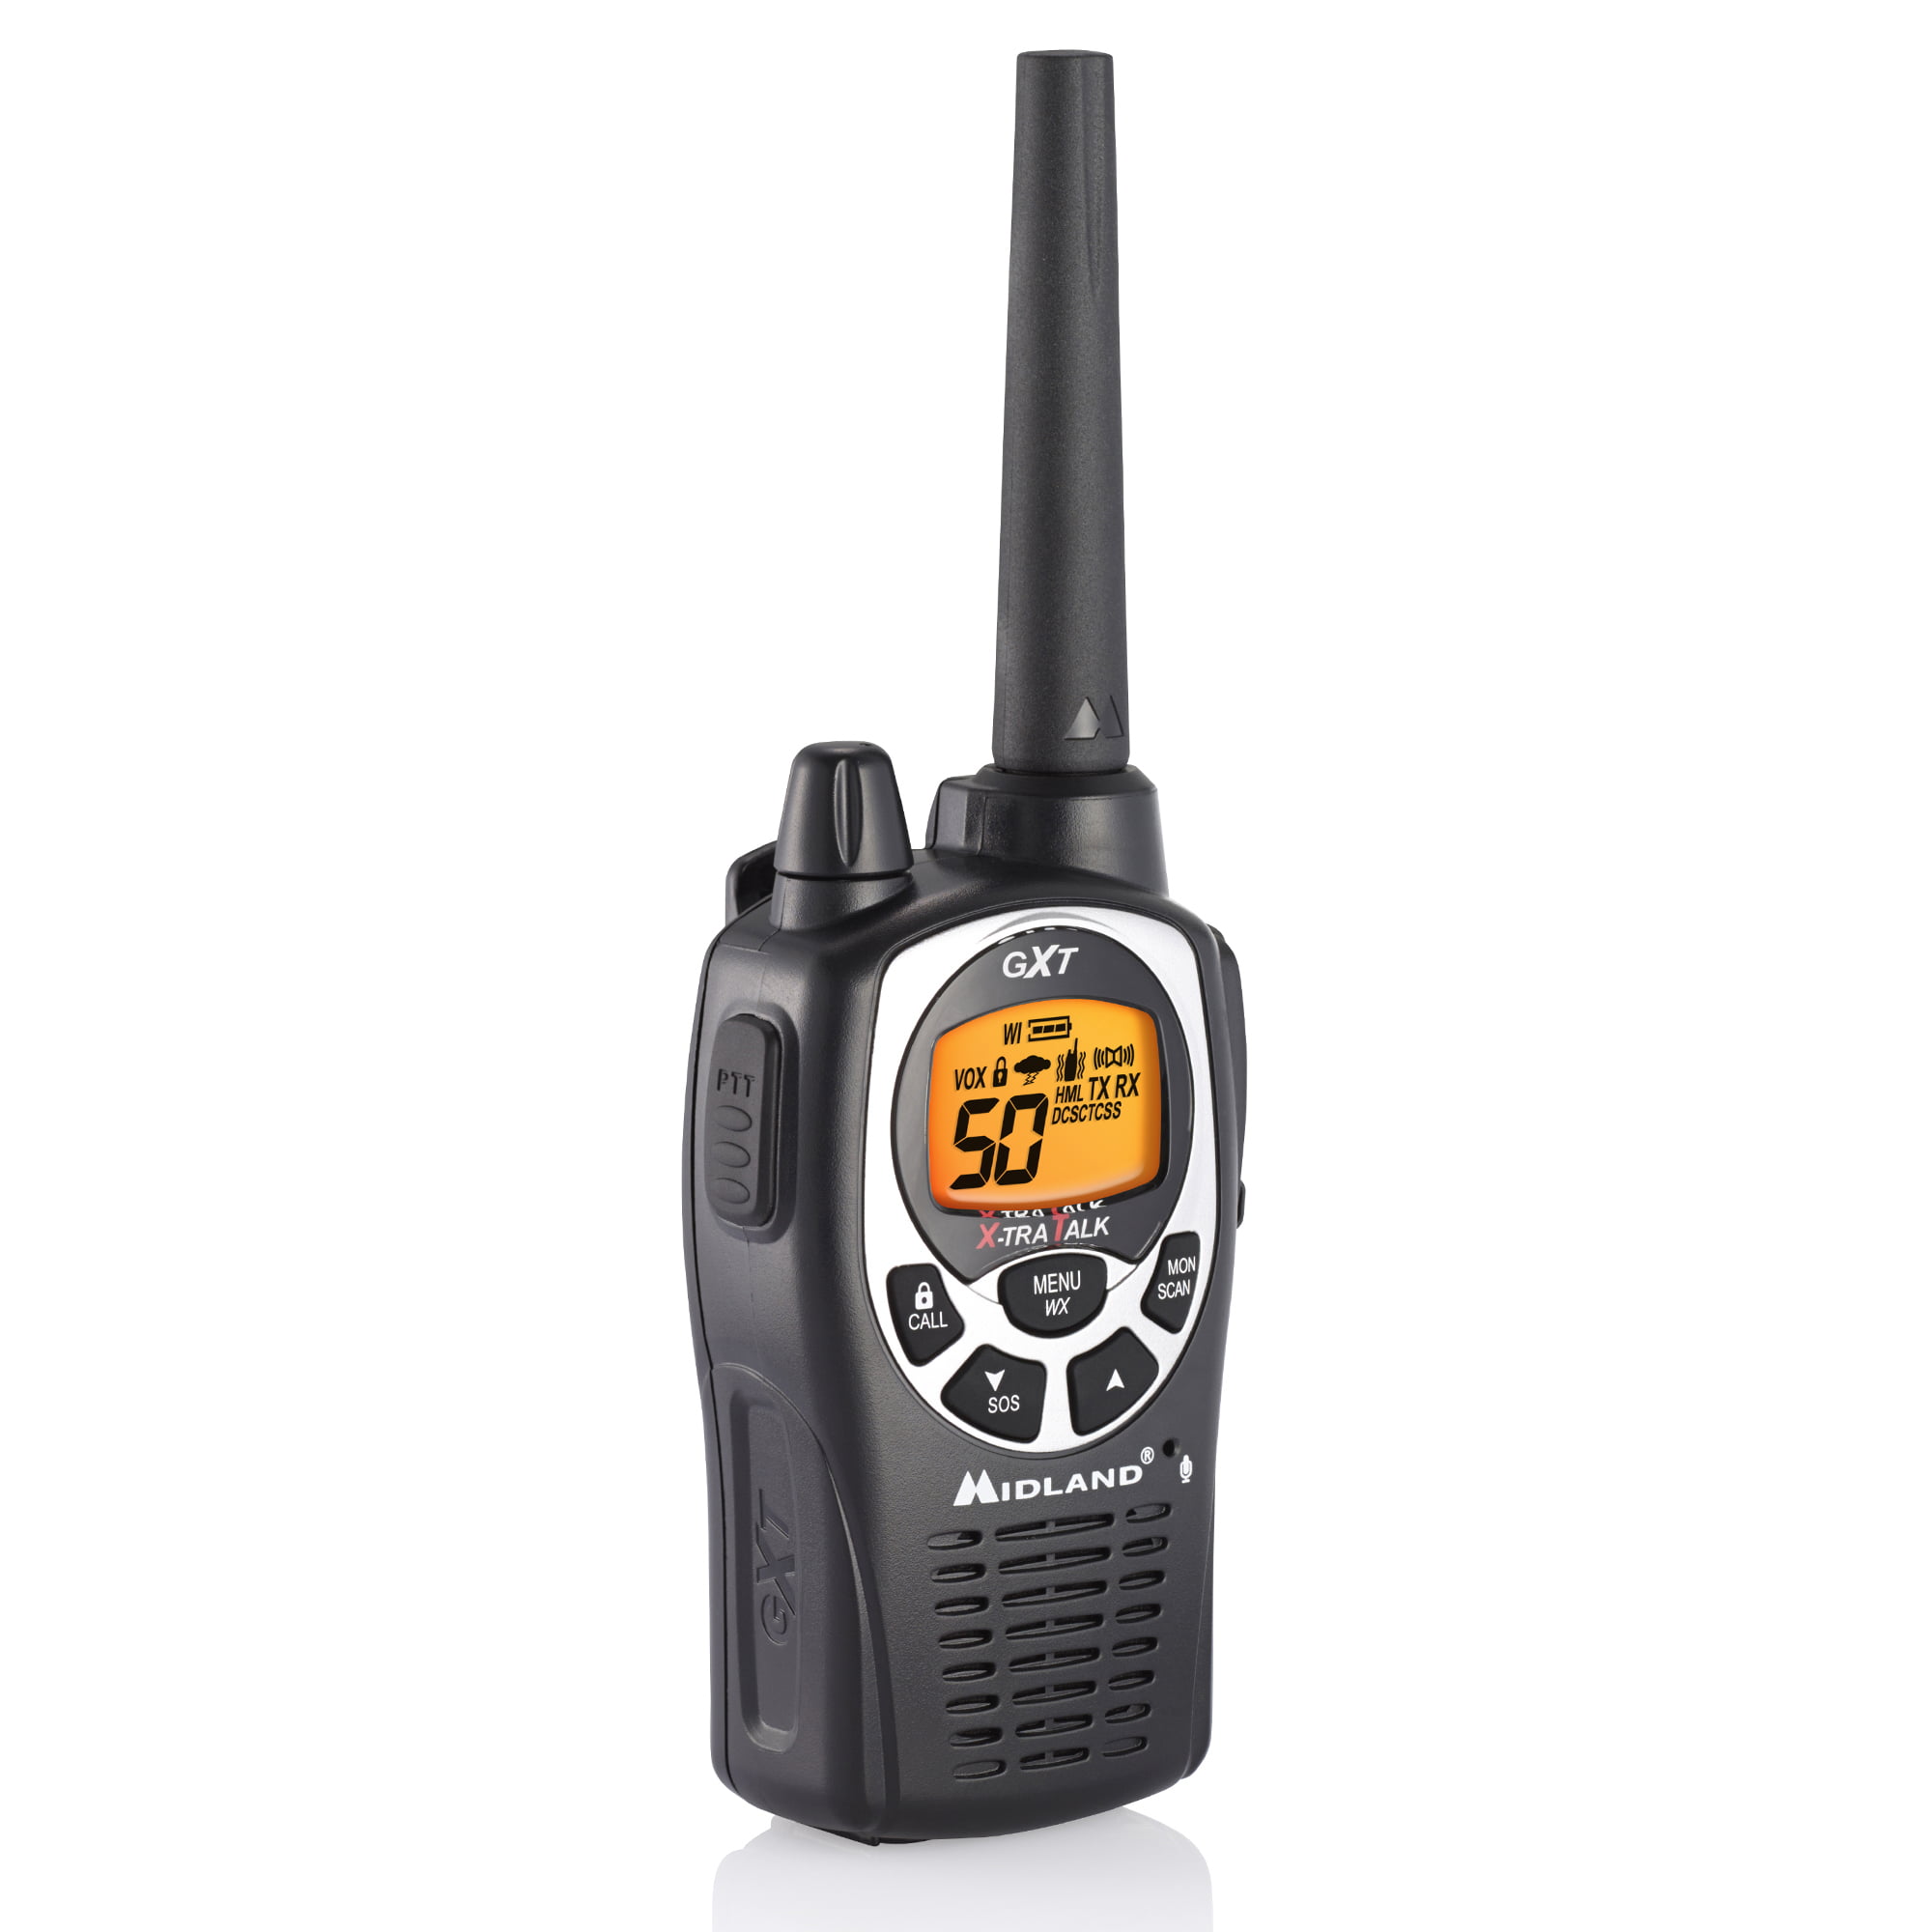 Waterproof Long Range Two-Way Radio with Privacy Codes